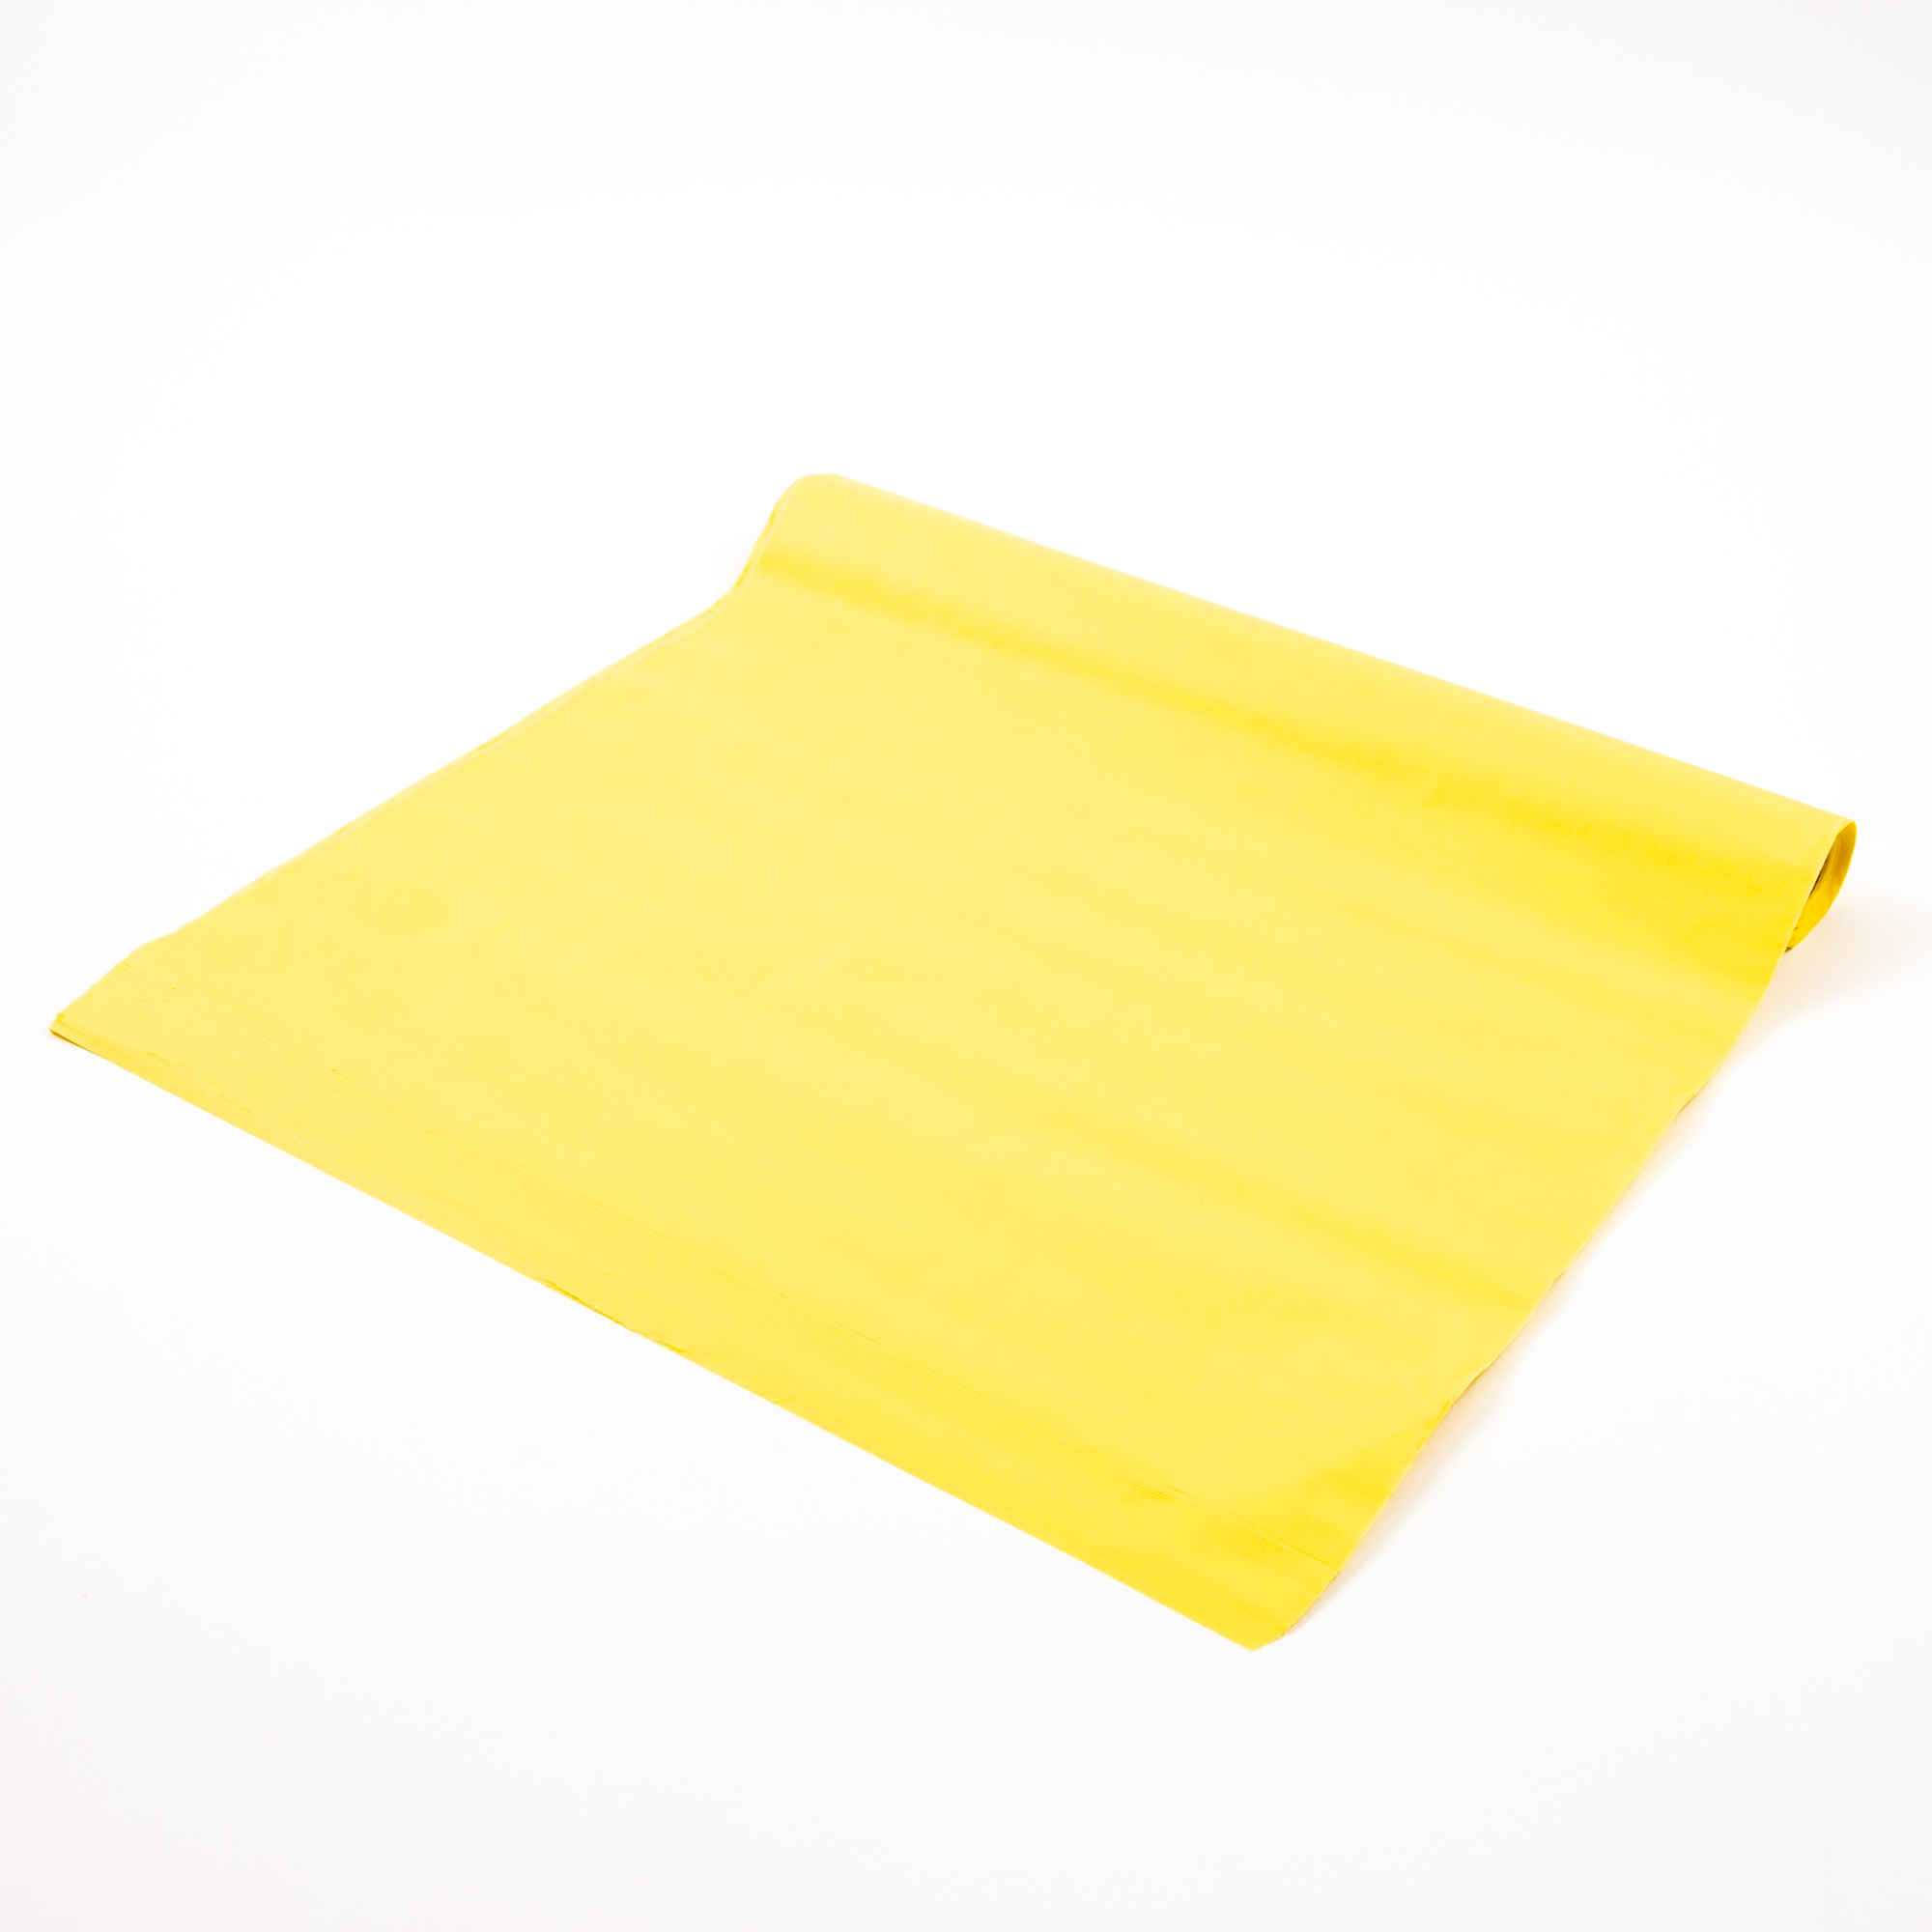 HE42607 - Classmates Tissue Paper - Yellow - 762 x 508mm - Pack of 48 ...